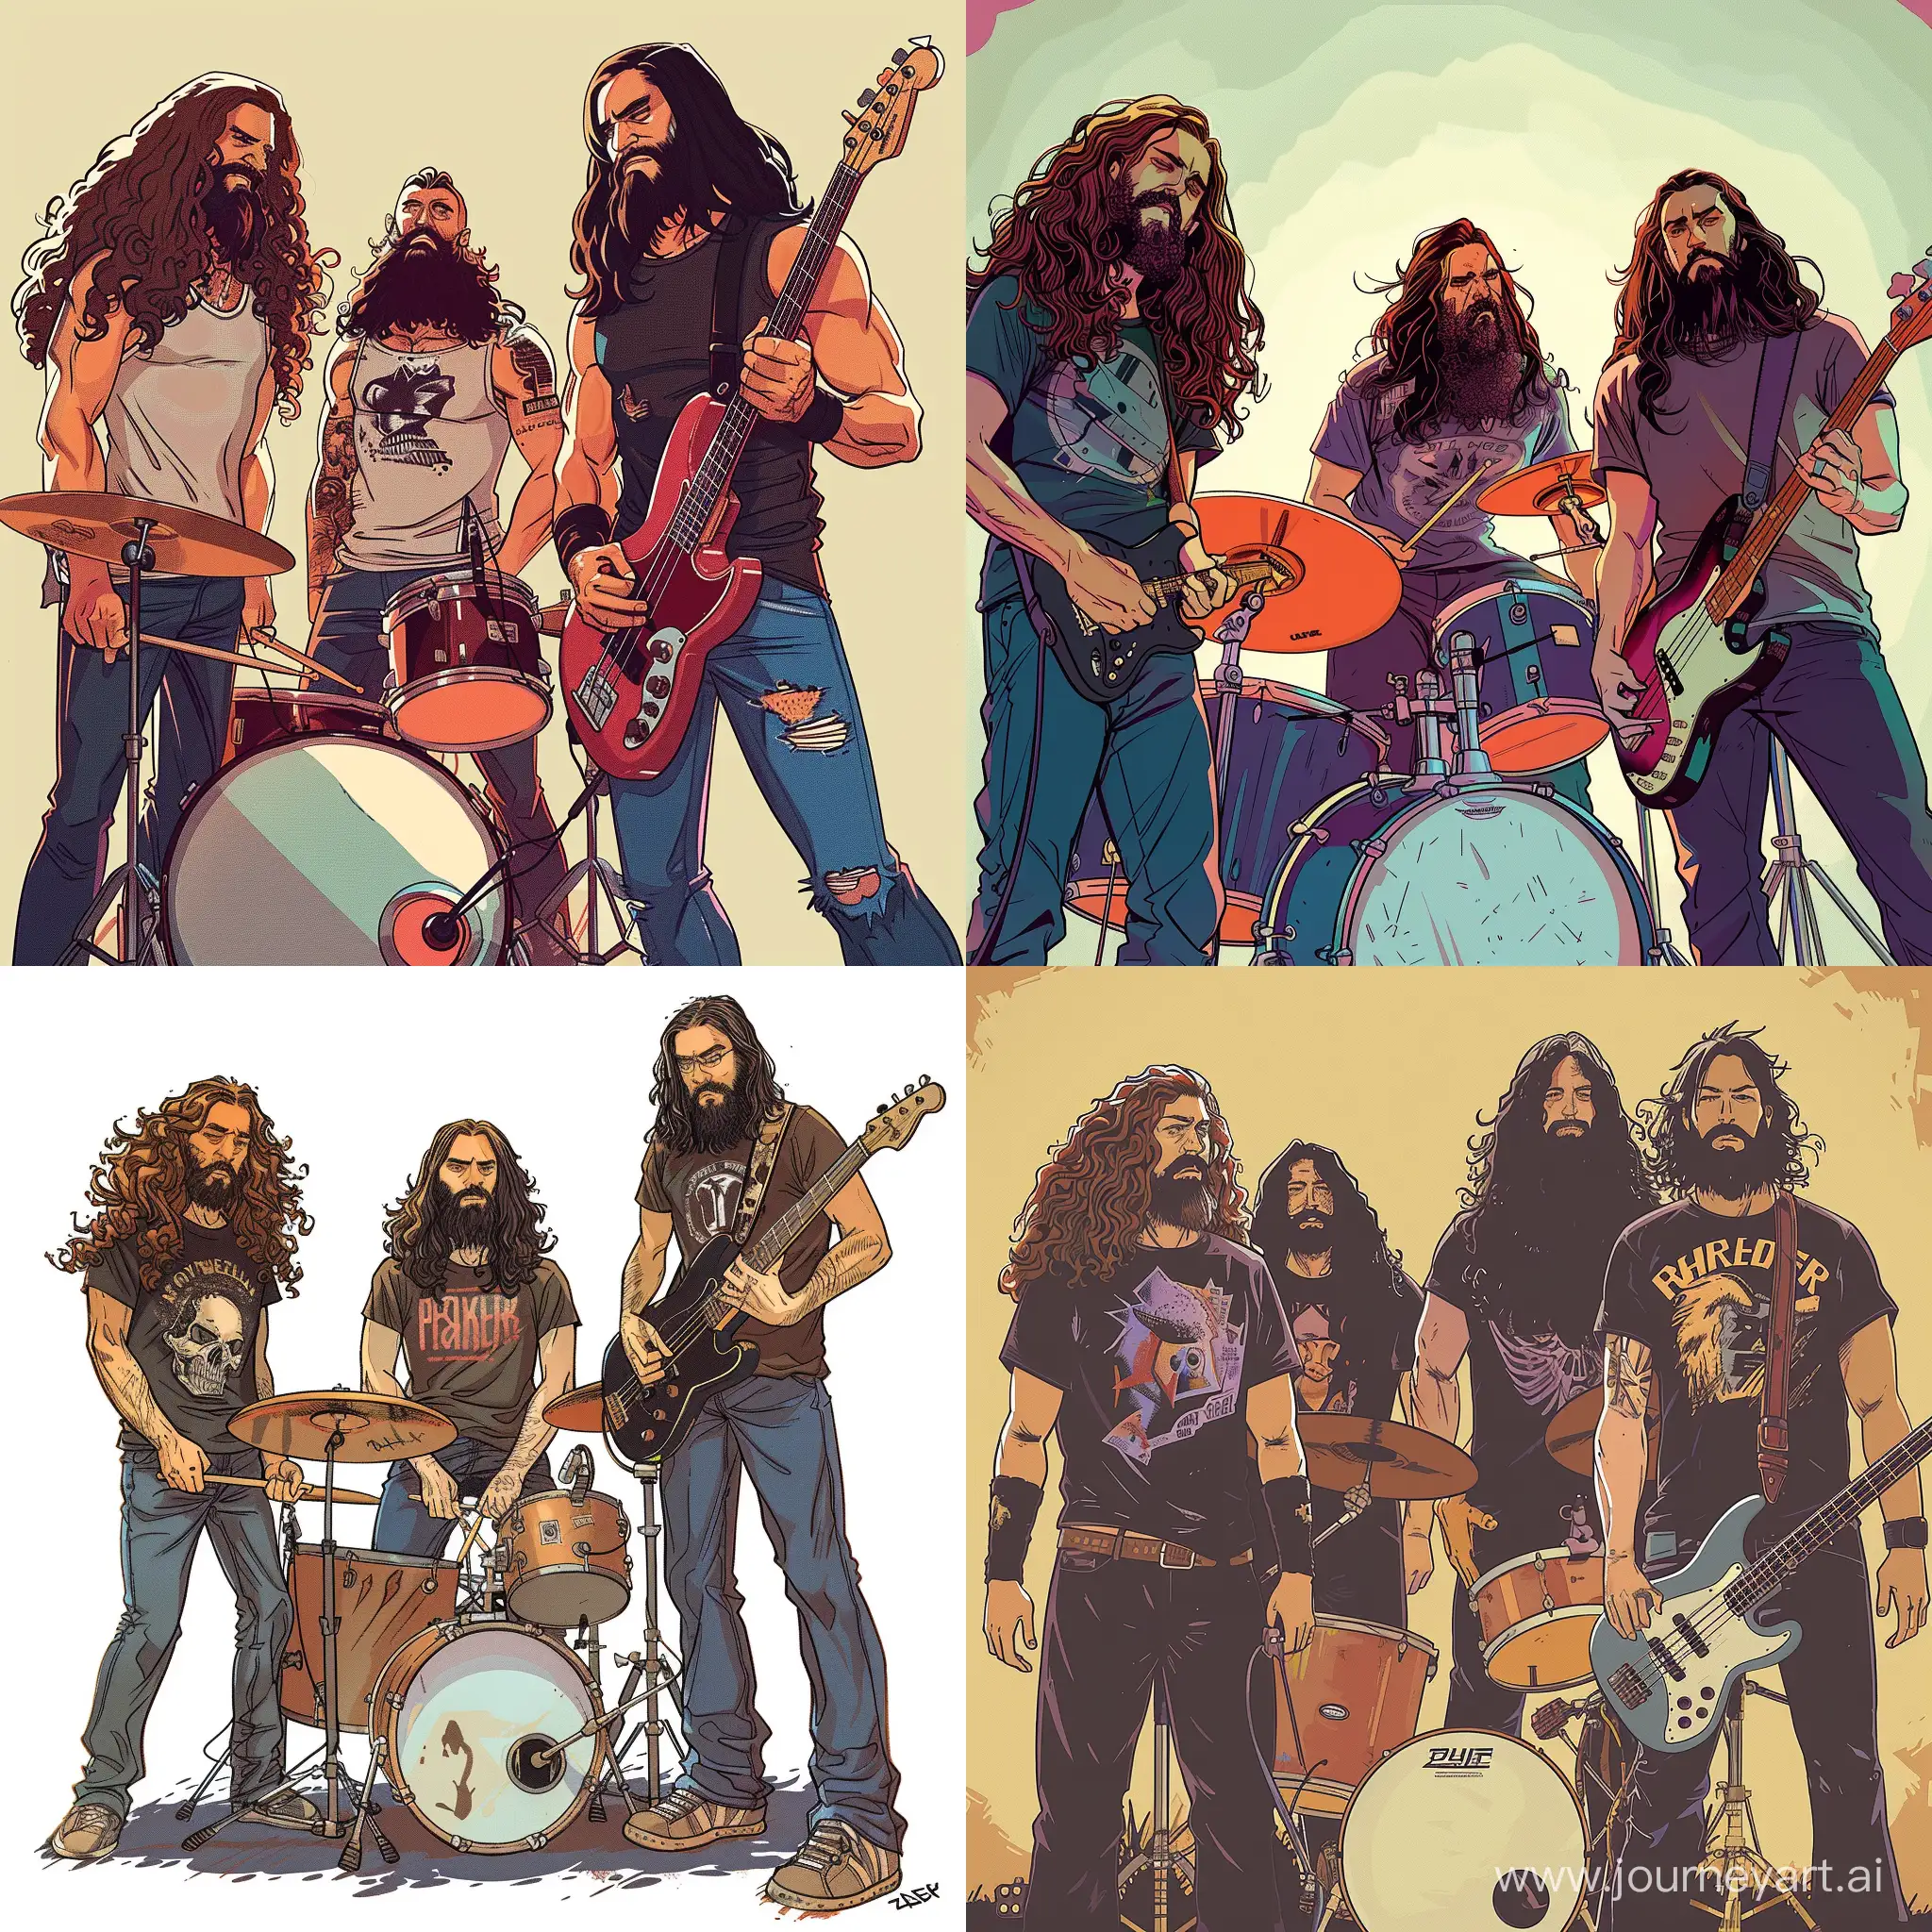 a 4 piece "stoner rock" band in the style of the preacher comics. the drummer has long curly brown hair, no beard. the bass player has long straight black hair and a guy fawkes beard. guitar player looks like frank zappa in t shirt and flairs, the other guitar player looks like the professional wrestler raven in t shirt and jeans.